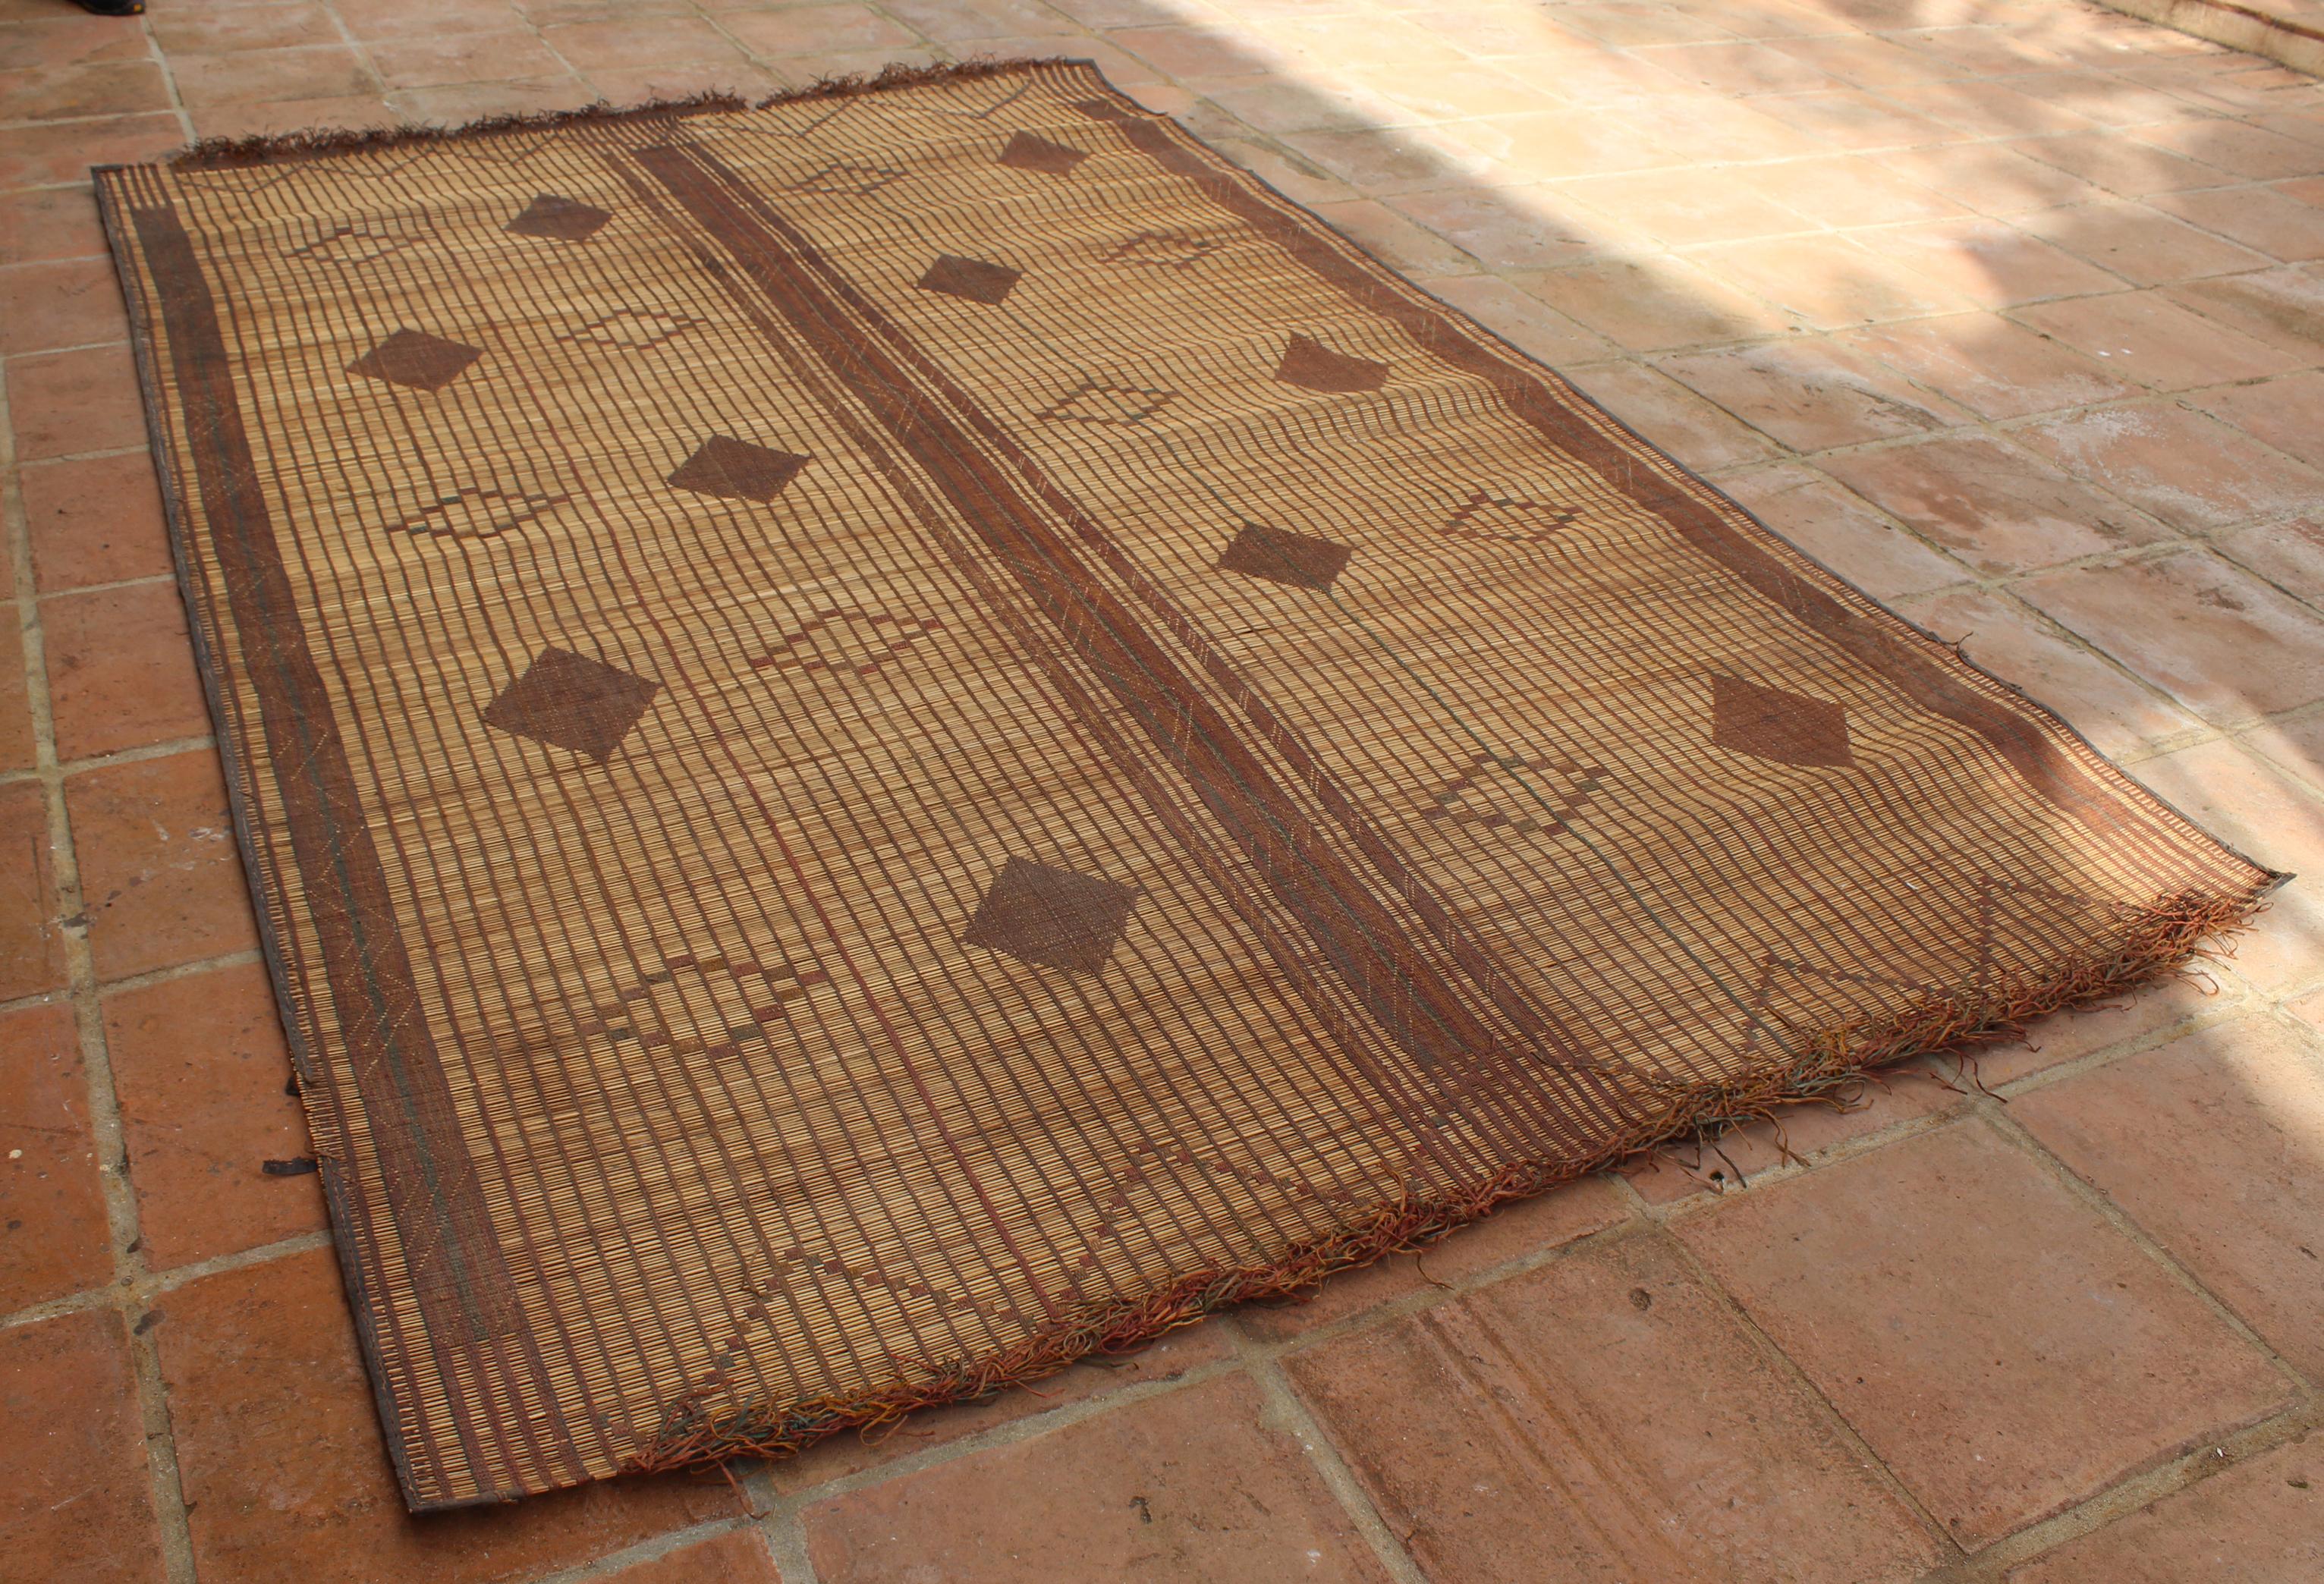 Mauritanian Tuareg leather mats are made of dwarf palm tree fibers and handwoven with leather stripes, this are great to use indoor or outdoor, beautiful brown earth-tone colors. This vintage midcentury carpets are made in Mauritania and have the